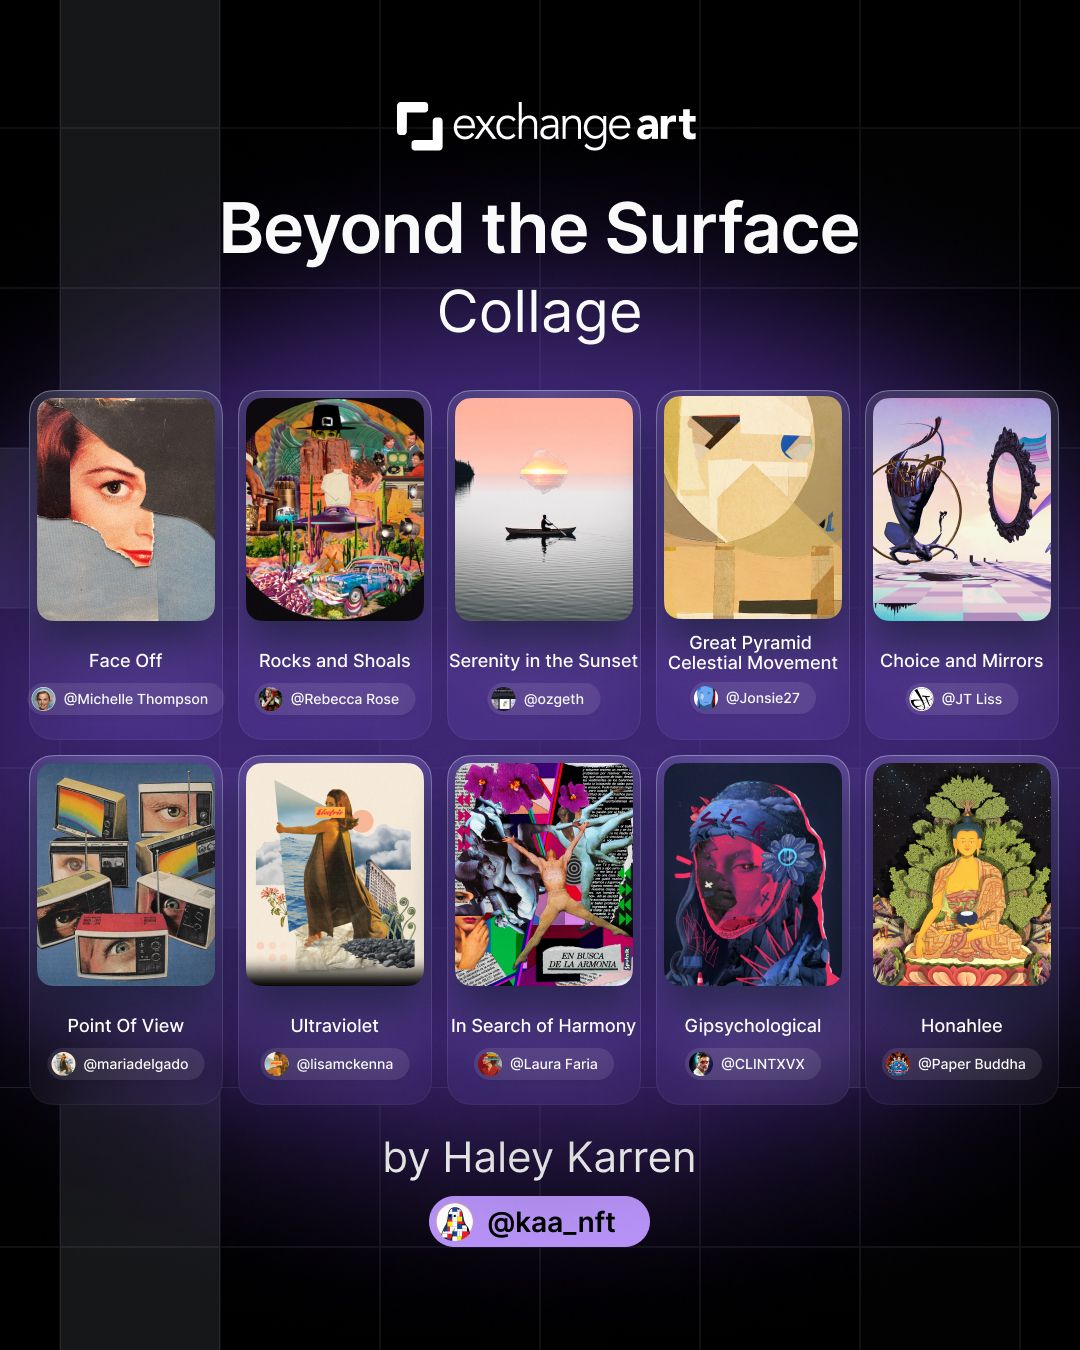 Beyond the Surface: Collage